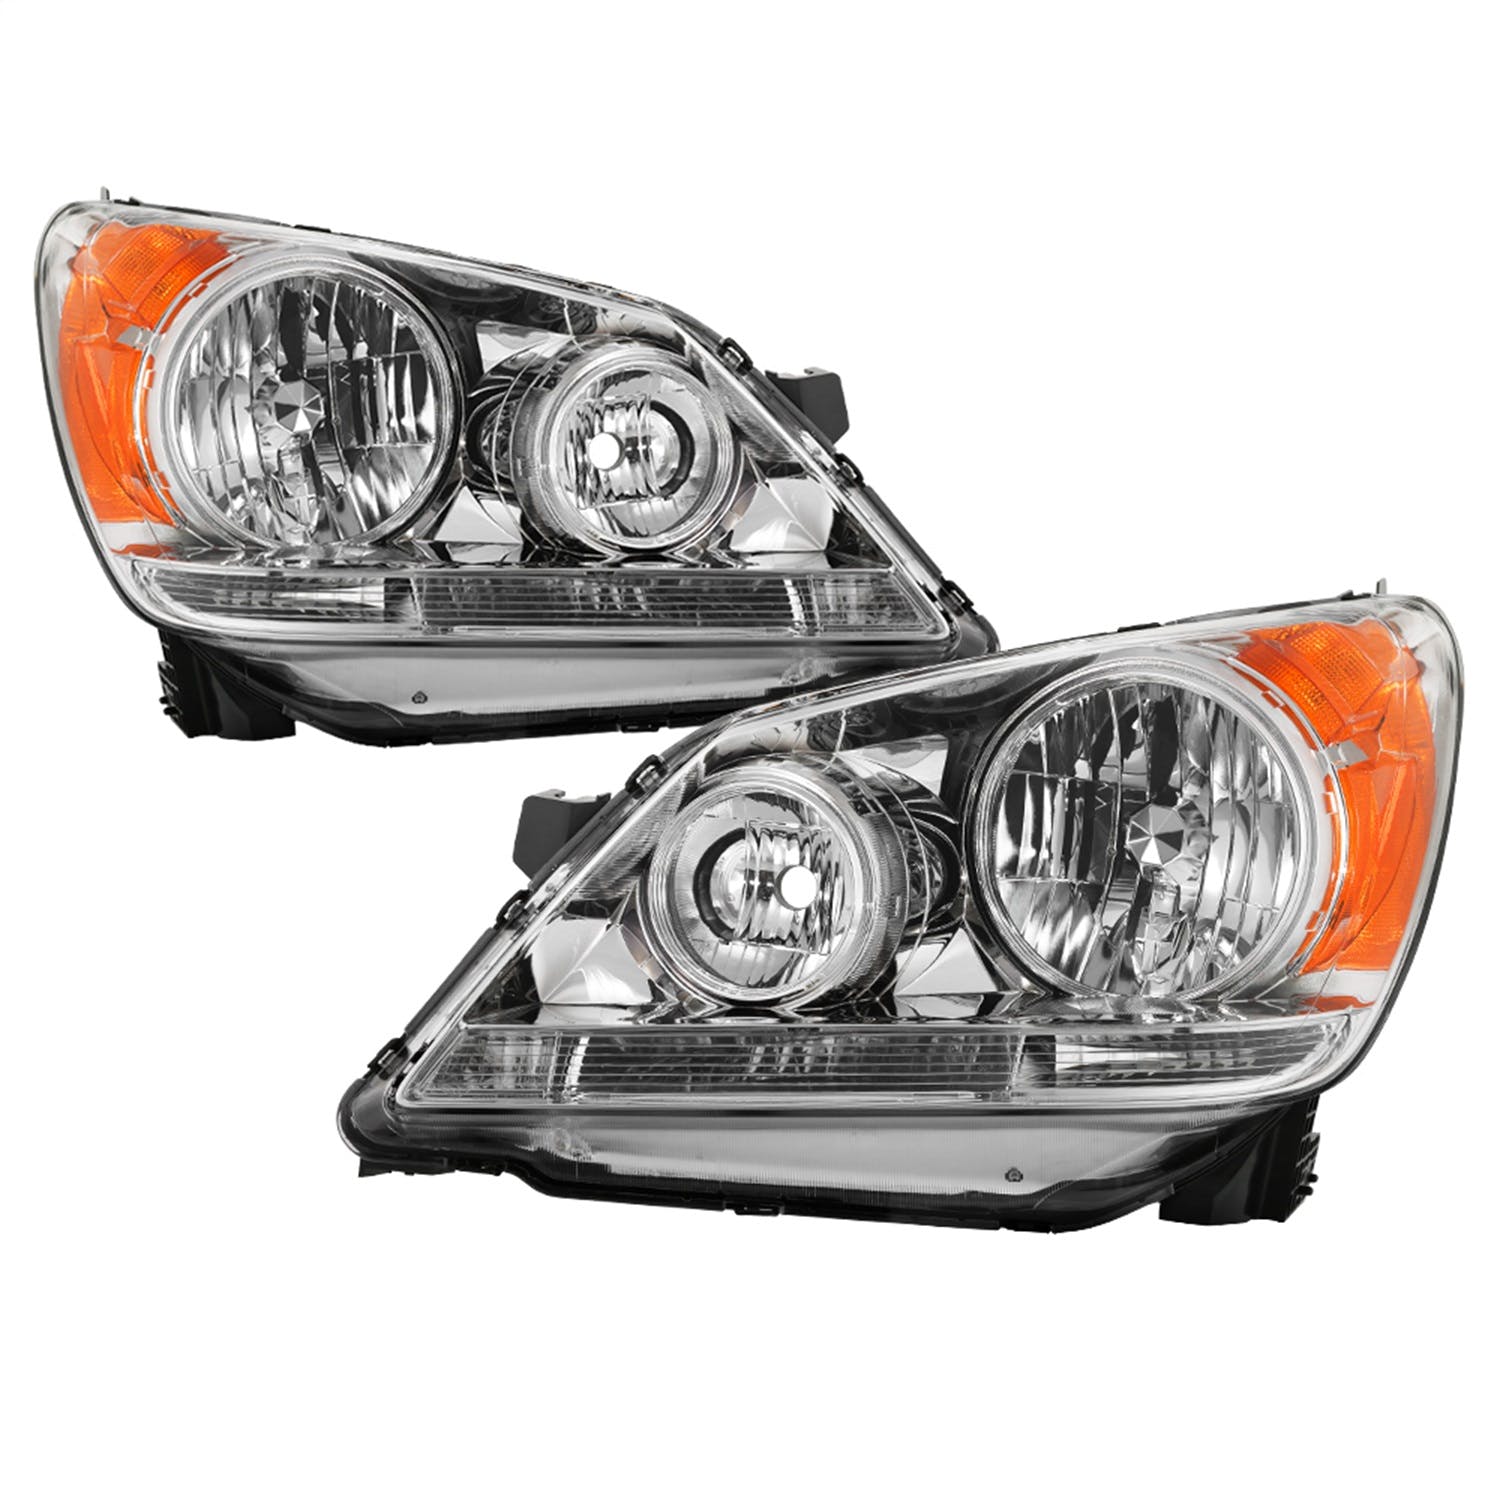 XTUNE POWER 9042720 Honda Odyssey 08 10 OEM Style Headlights Low Beam HB4(Not Included) ; High Beam HB3(Not Included) ; Signal W21W(Included) Chrome